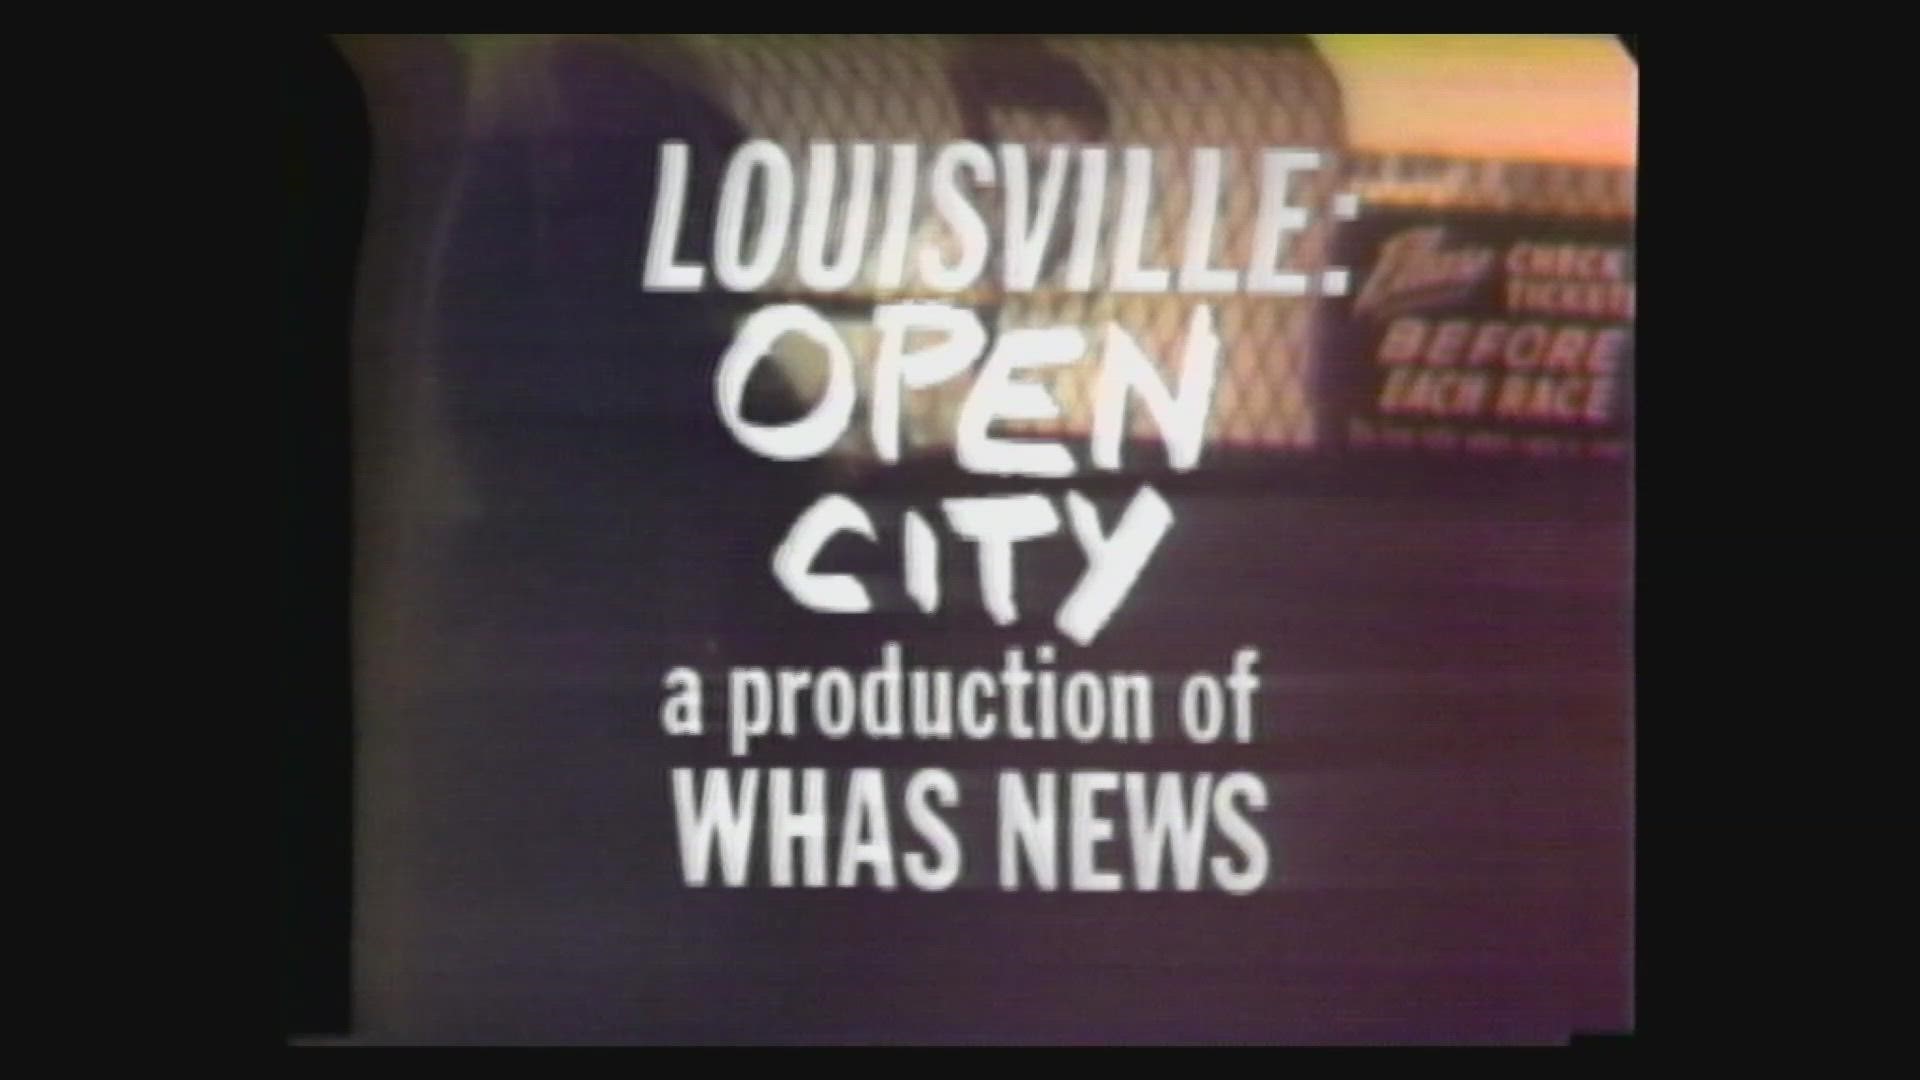 It was an important part of WHAS11's history of producing original, in-depth specials that ended up getting awards and acclaim.